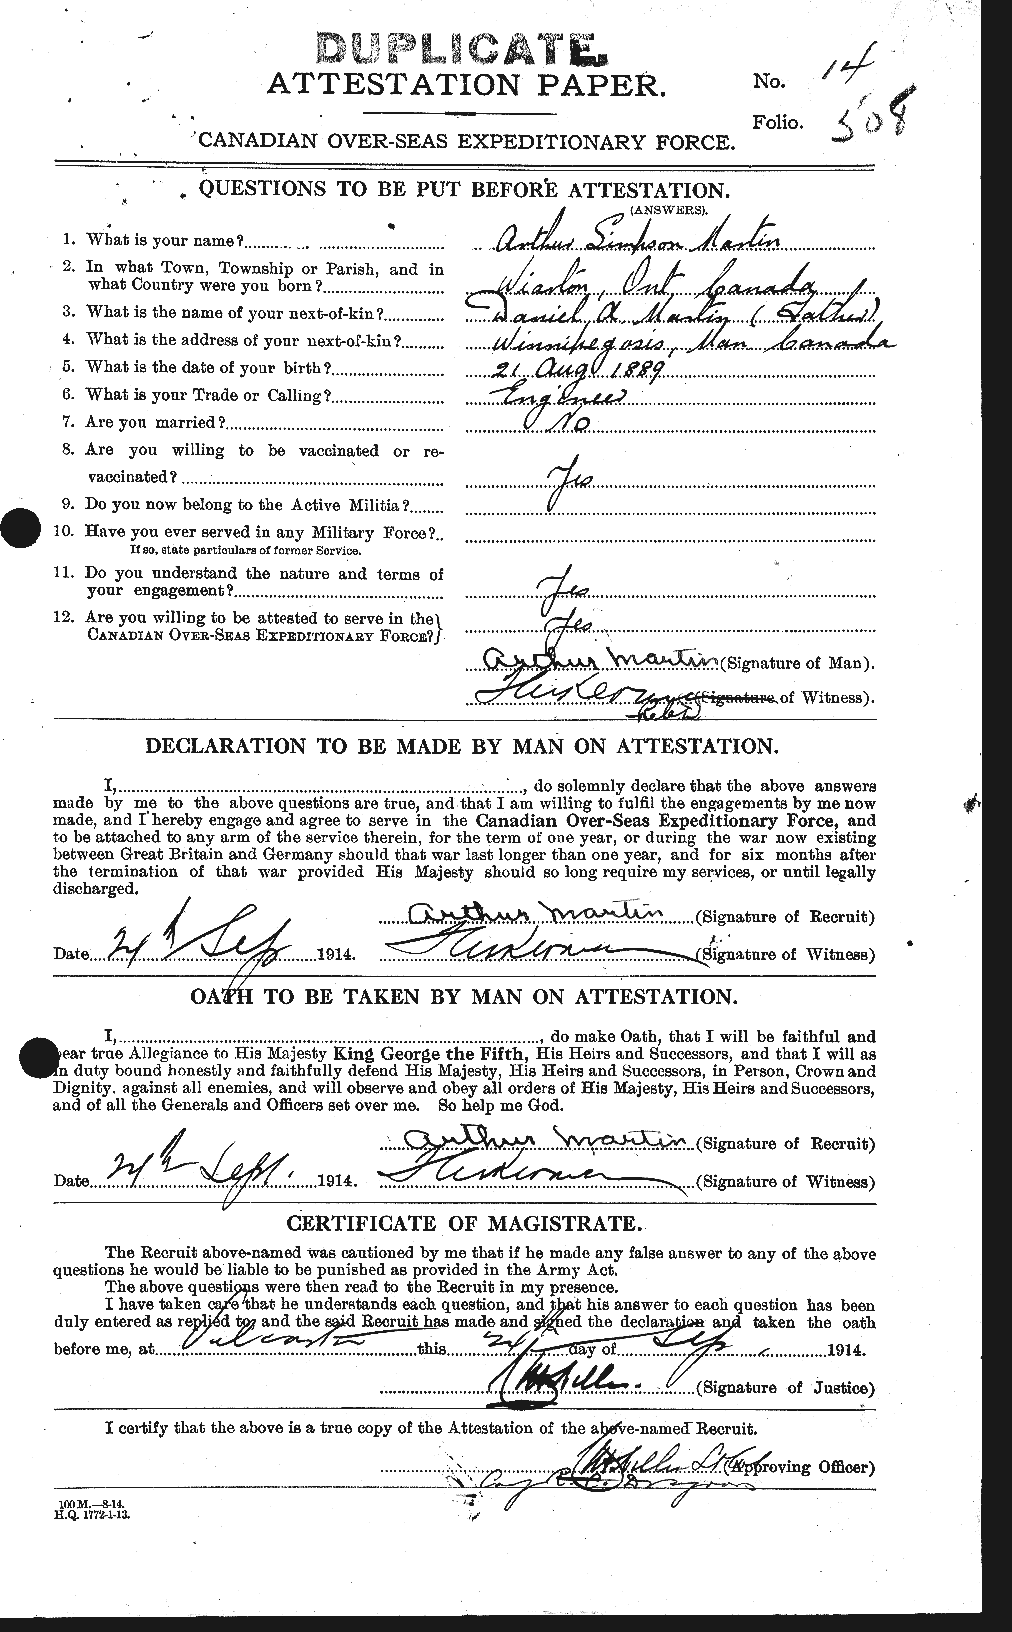 Personnel Records of the First World War - CEF 481591a